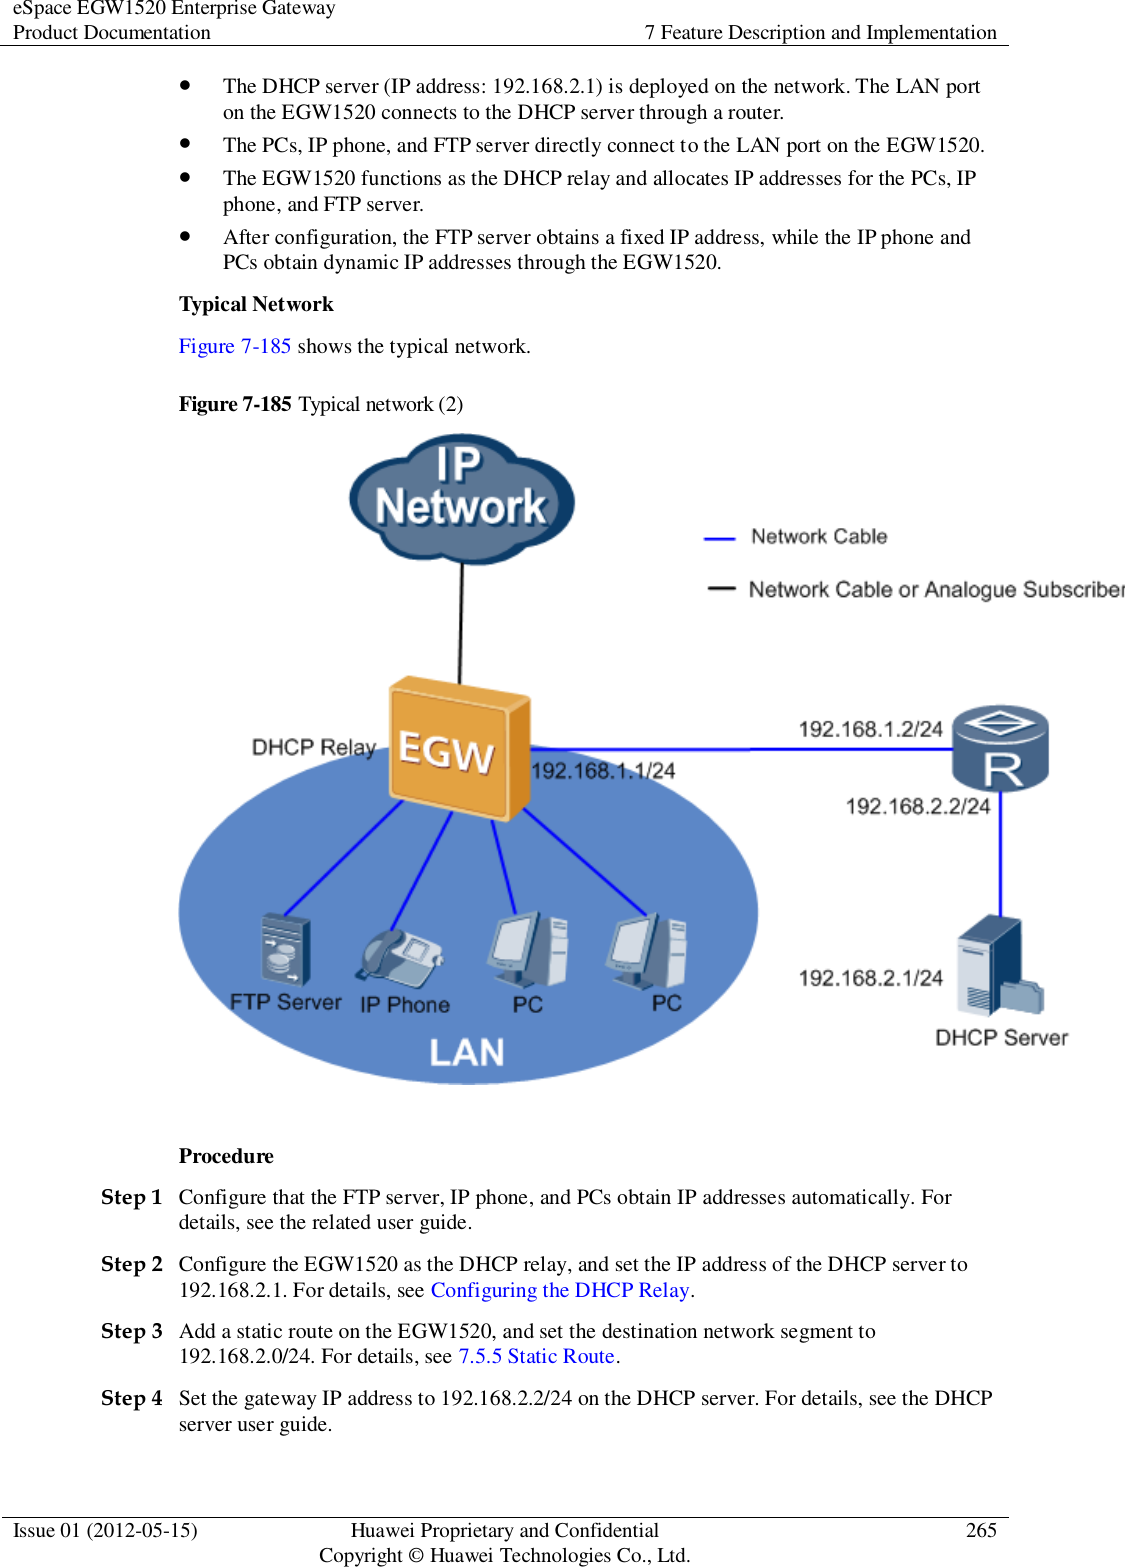 eSpace EGW1520 Enterprise Gateway Product Documentation 7 Feature Description and Implementation  Issue 01 (2012-05-15) Huawei Proprietary and Confidential                                     Copyright © Huawei Technologies Co., Ltd. 265   The DHCP server (IP address: 192.168.2.1) is deployed on the network. The LAN port on the EGW1520 connects to the DHCP server through a router.  The PCs, IP phone, and FTP server directly connect to the LAN port on the EGW1520.  The EGW1520 functions as the DHCP relay and allocates IP addresses for the PCs, IP phone, and FTP server.  After configuration, the FTP server obtains a fixed IP address, while the IP phone and PCs obtain dynamic IP addresses through the EGW1520. Typical Network Figure 7-185 shows the typical network. Figure 7-185 Typical network (2)   Procedure Step 1 Configure that the FTP server, IP phone, and PCs obtain IP addresses automatically. For details, see the related user guide. Step 2 Configure the EGW1520 as the DHCP relay, and set the IP address of the DHCP server to 192.168.2.1. For details, see Configuring the DHCP Relay. Step 3 Add a static route on the EGW1520, and set the destination network segment to 192.168.2.0/24. For details, see 7.5.5 Static Route. Step 4 Set the gateway IP address to 192.168.2.2/24 on the DHCP server. For details, see the DHCP server user guide. 